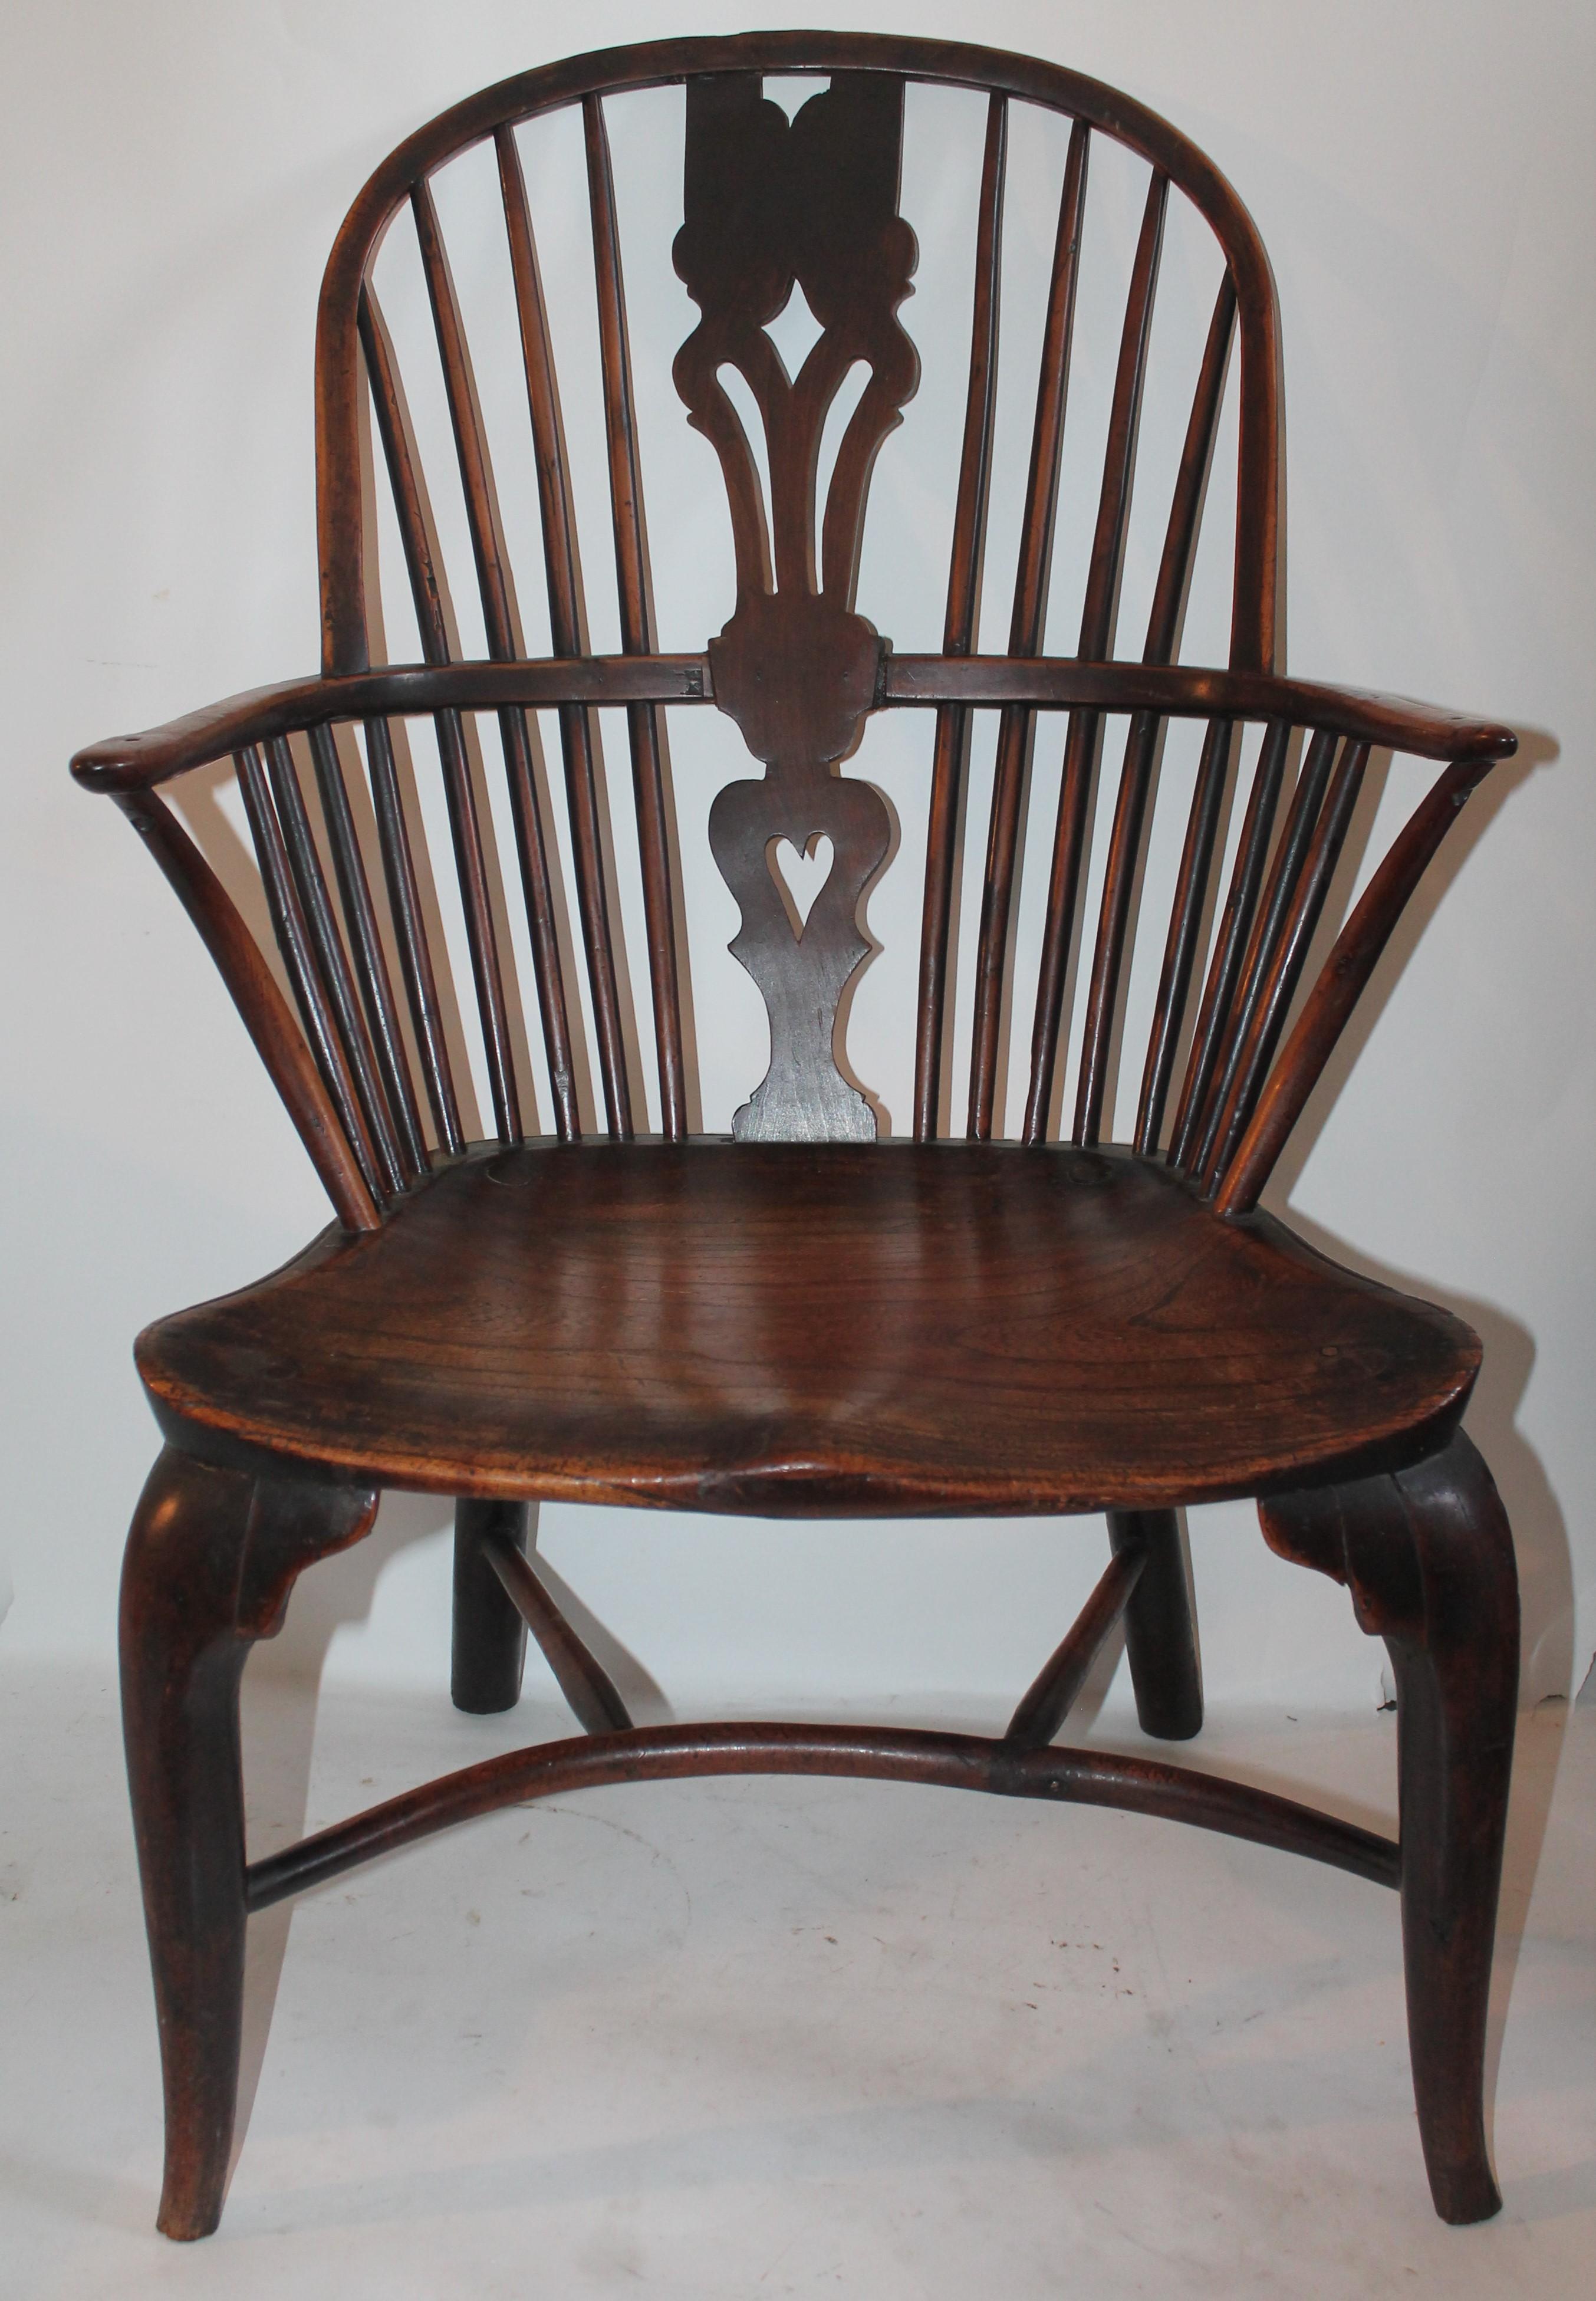 18th century Original English Windsor chair with fine old patina. The condition is very good and fine details to the back splash. Some old repairs but nice form.